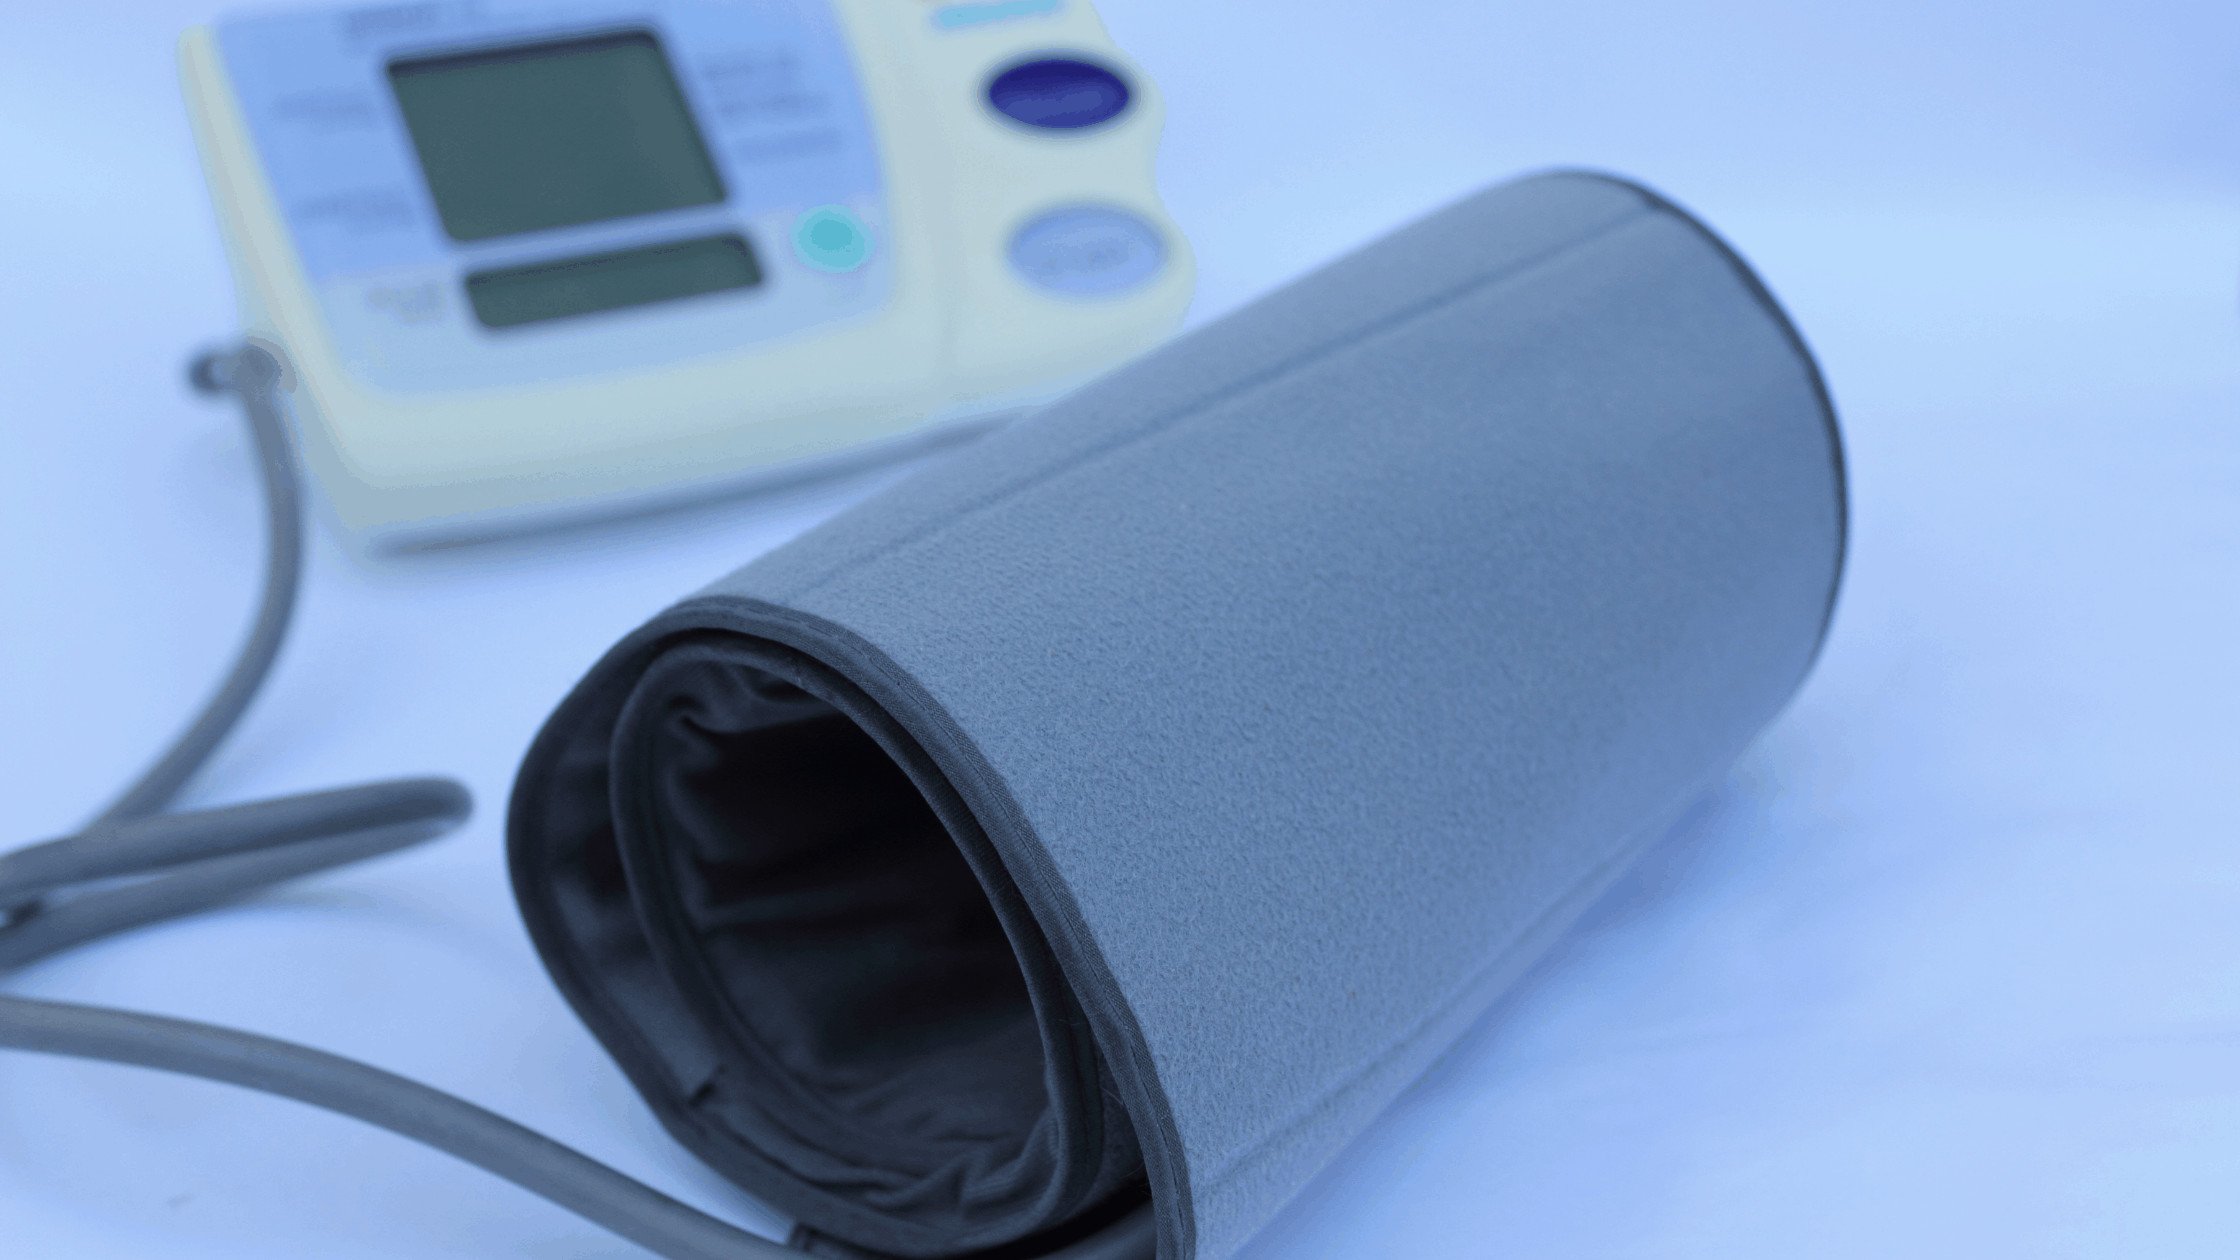 11blood pressure cuff with monitor